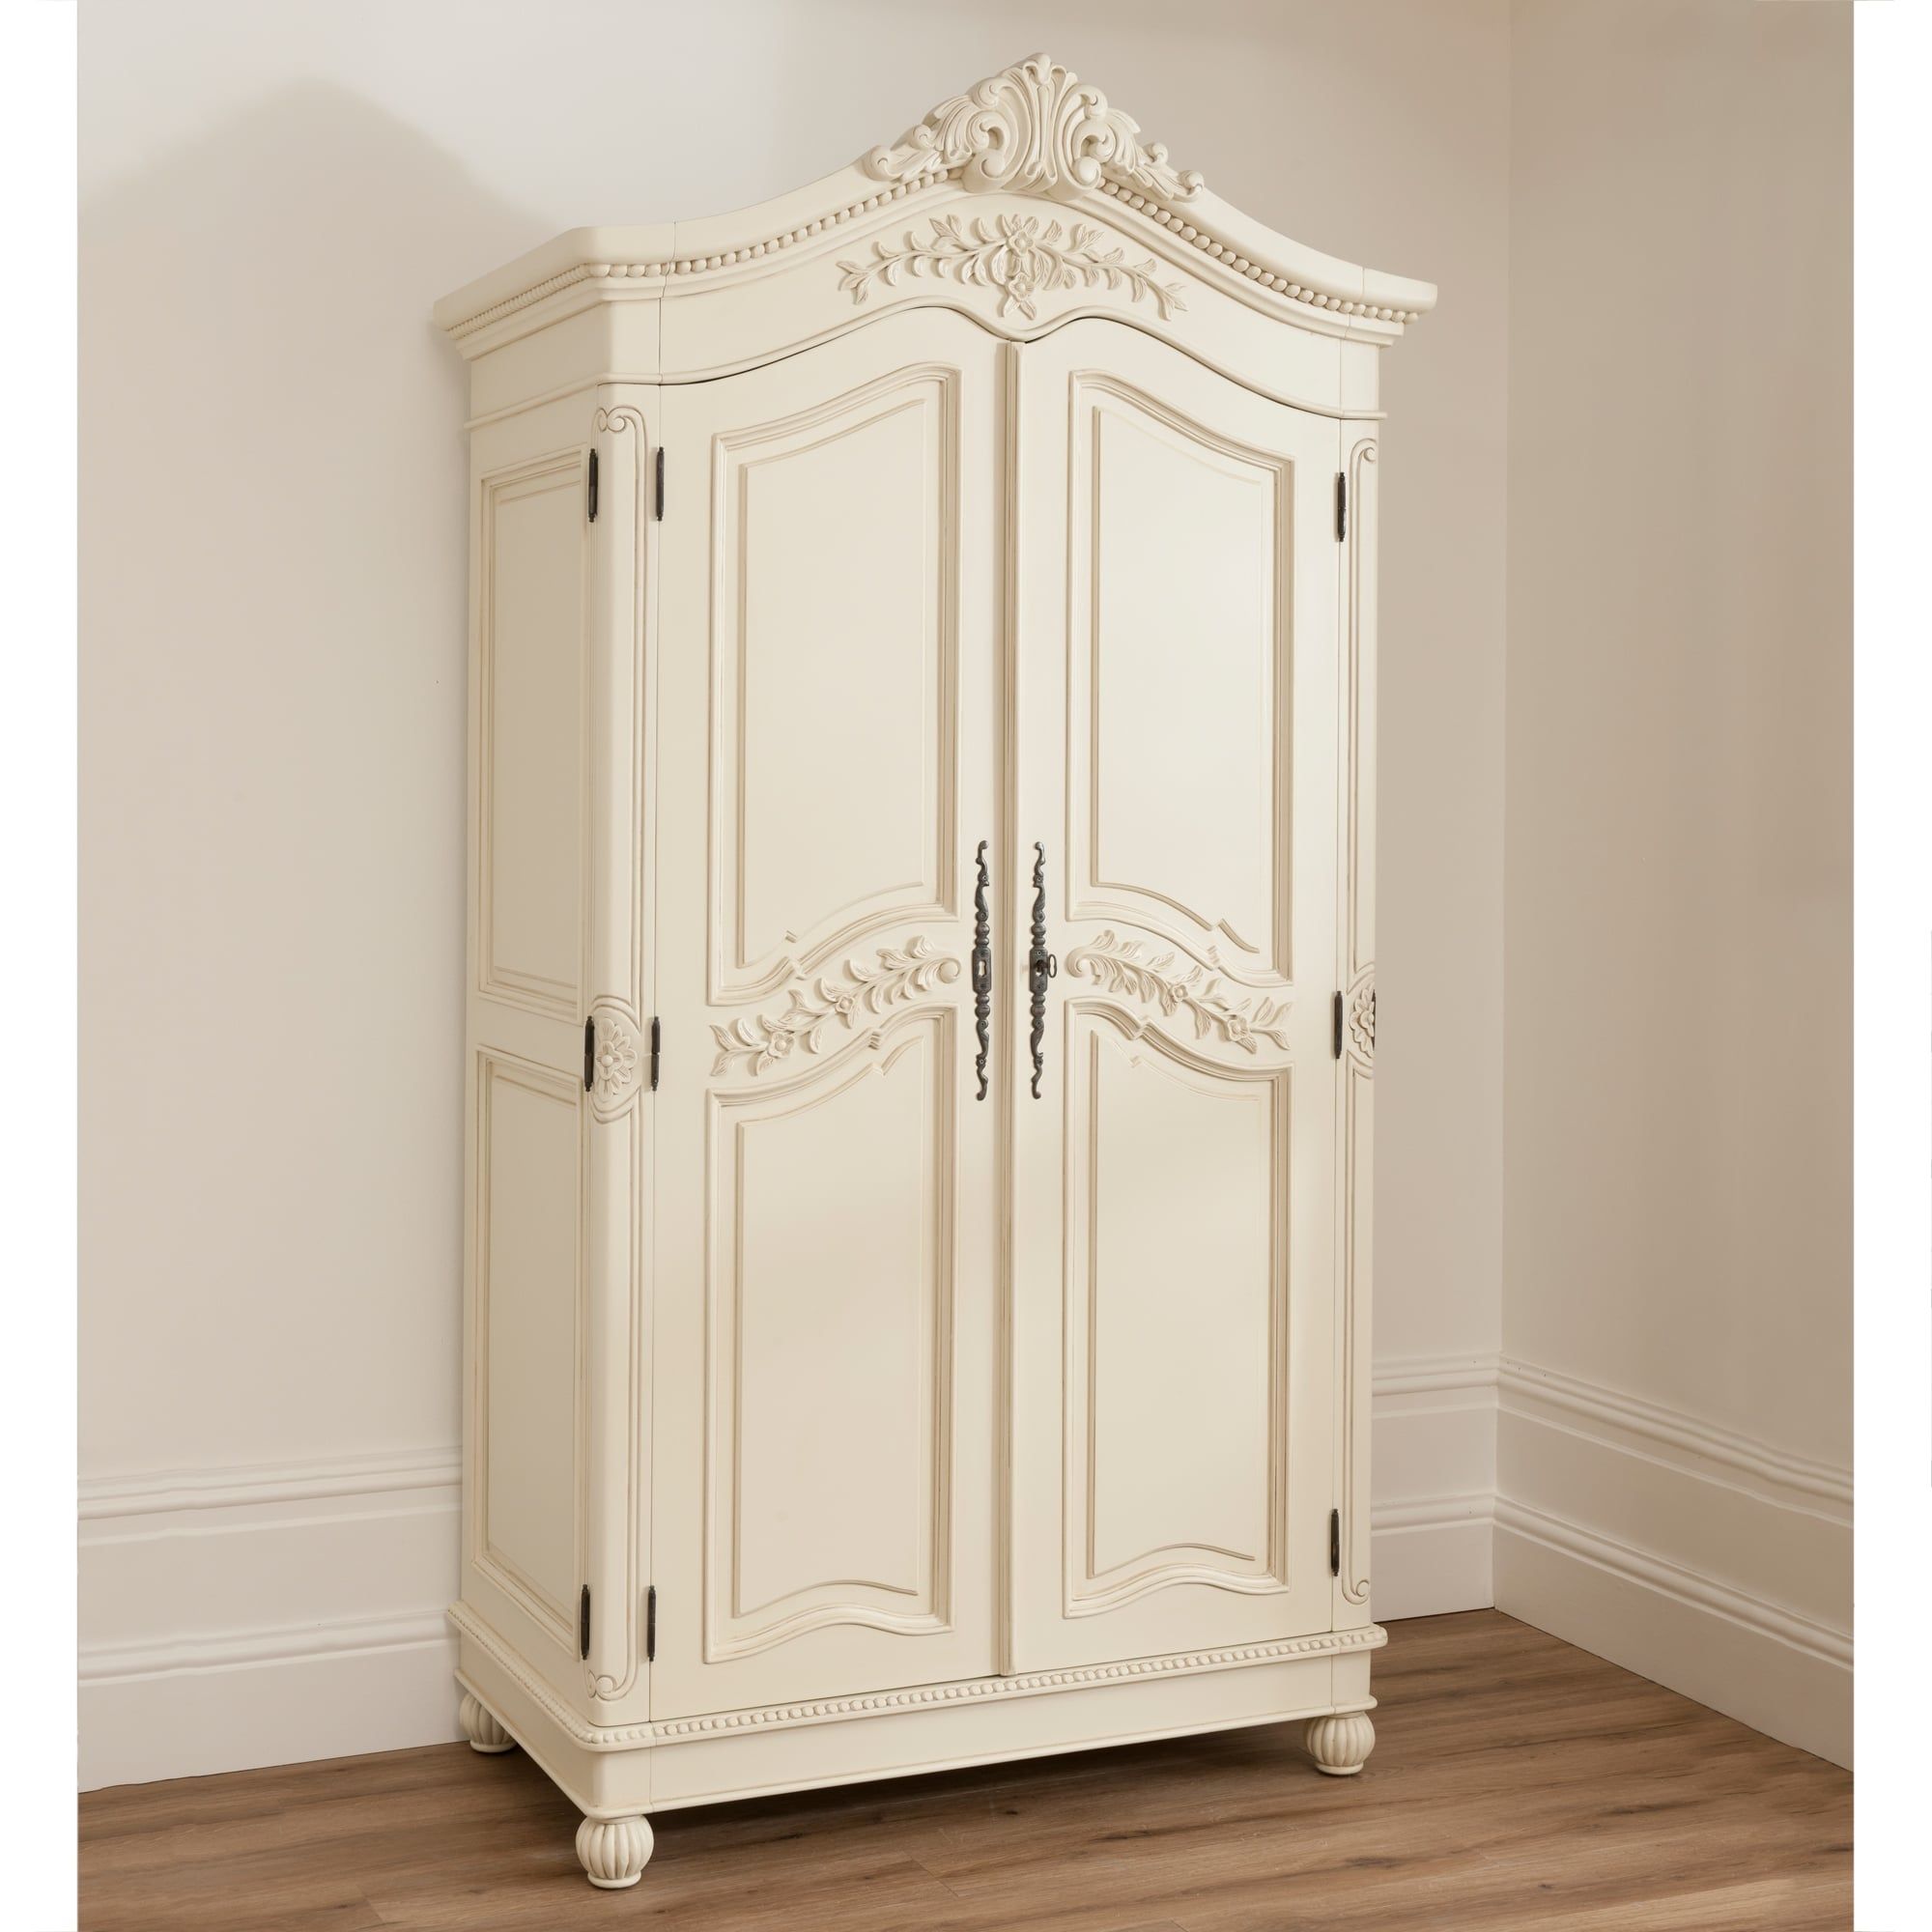 Bordeaux Ivory Shabby Chic Wardrobe | Shabby Chic Furniture In Cheap Shabby Chic Wardrobes (View 4 of 15)